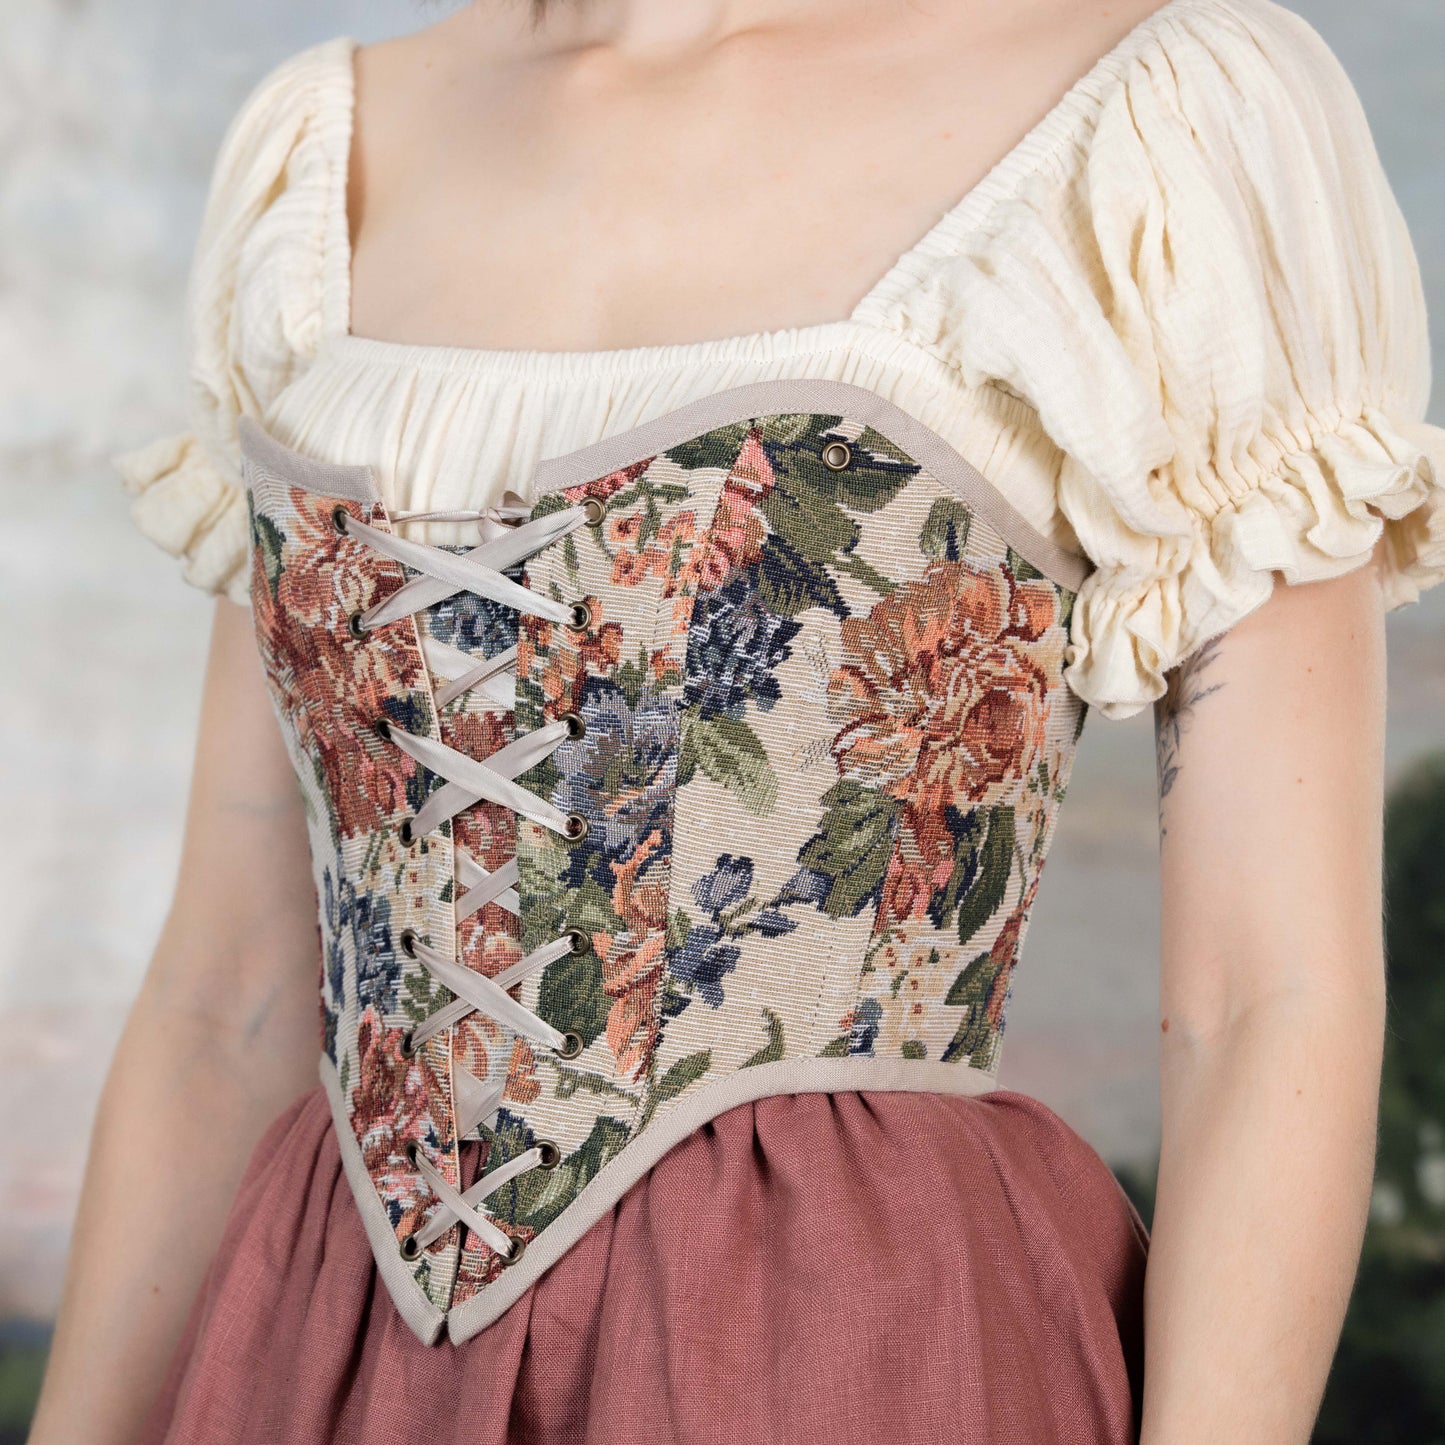 Floral Tapestry Corset Top, Lace Corset Top, Bustier Corset Top -   Canada